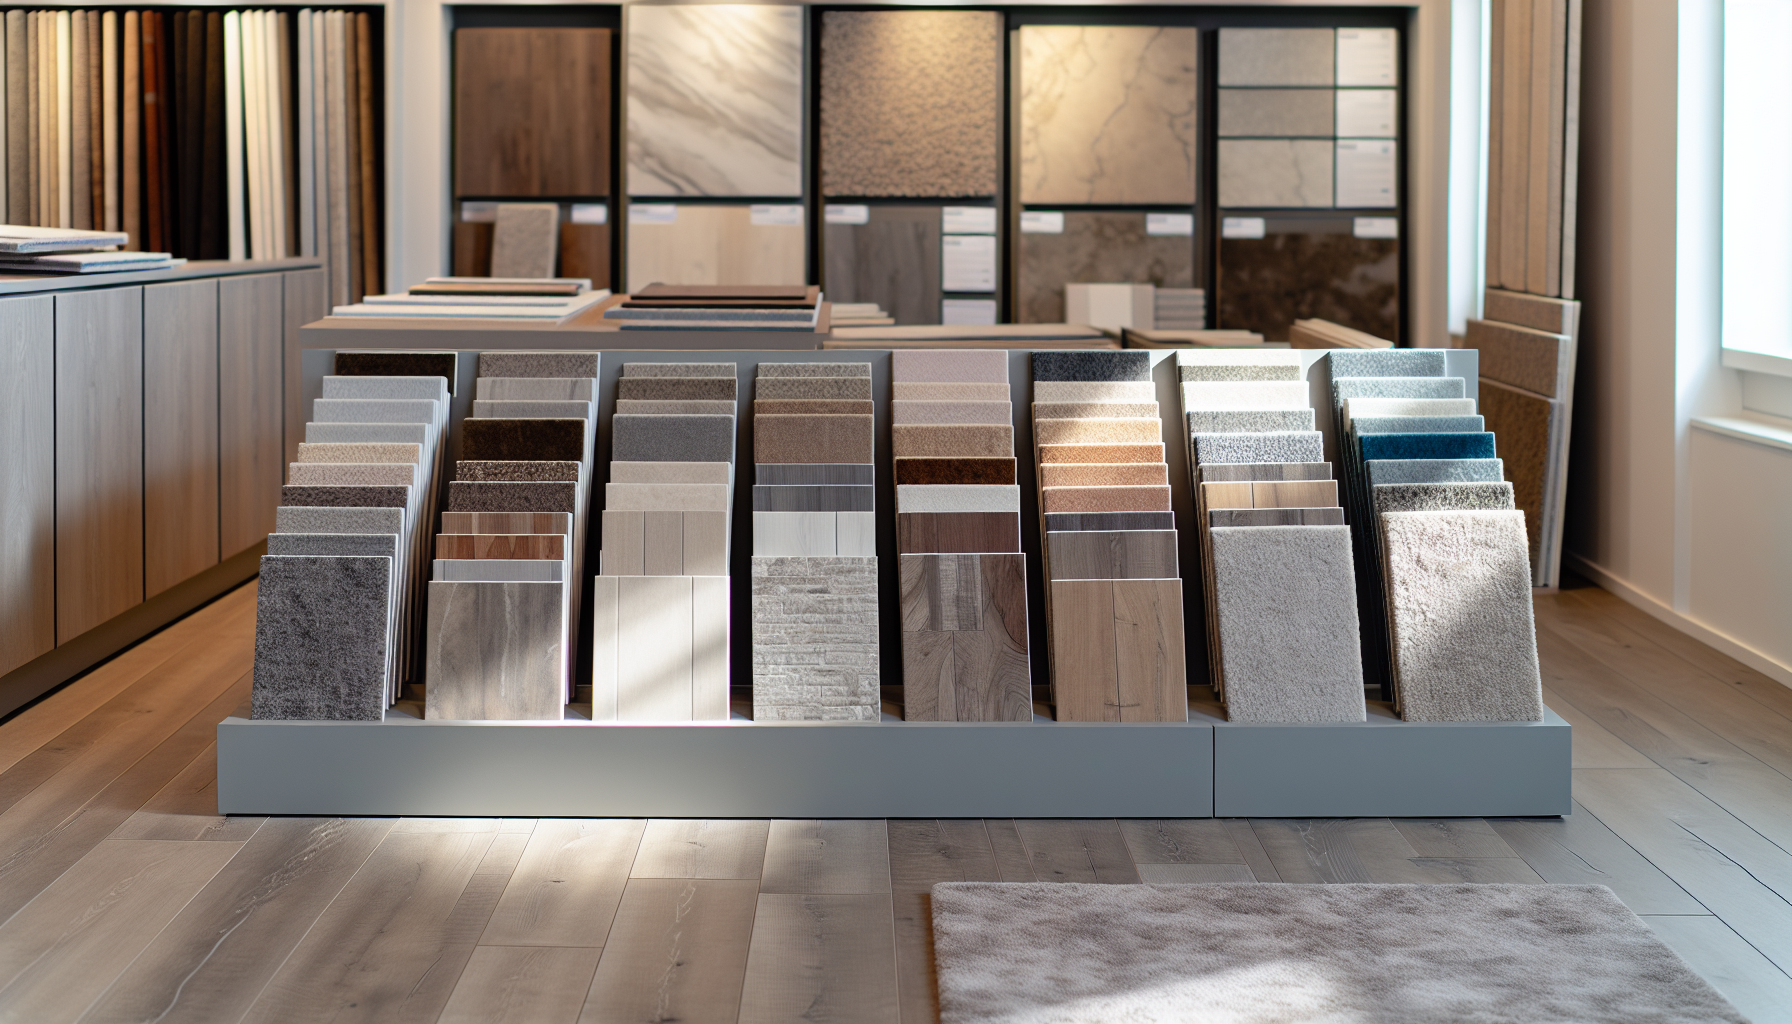 A variety of flooring samples displayed in a room setting